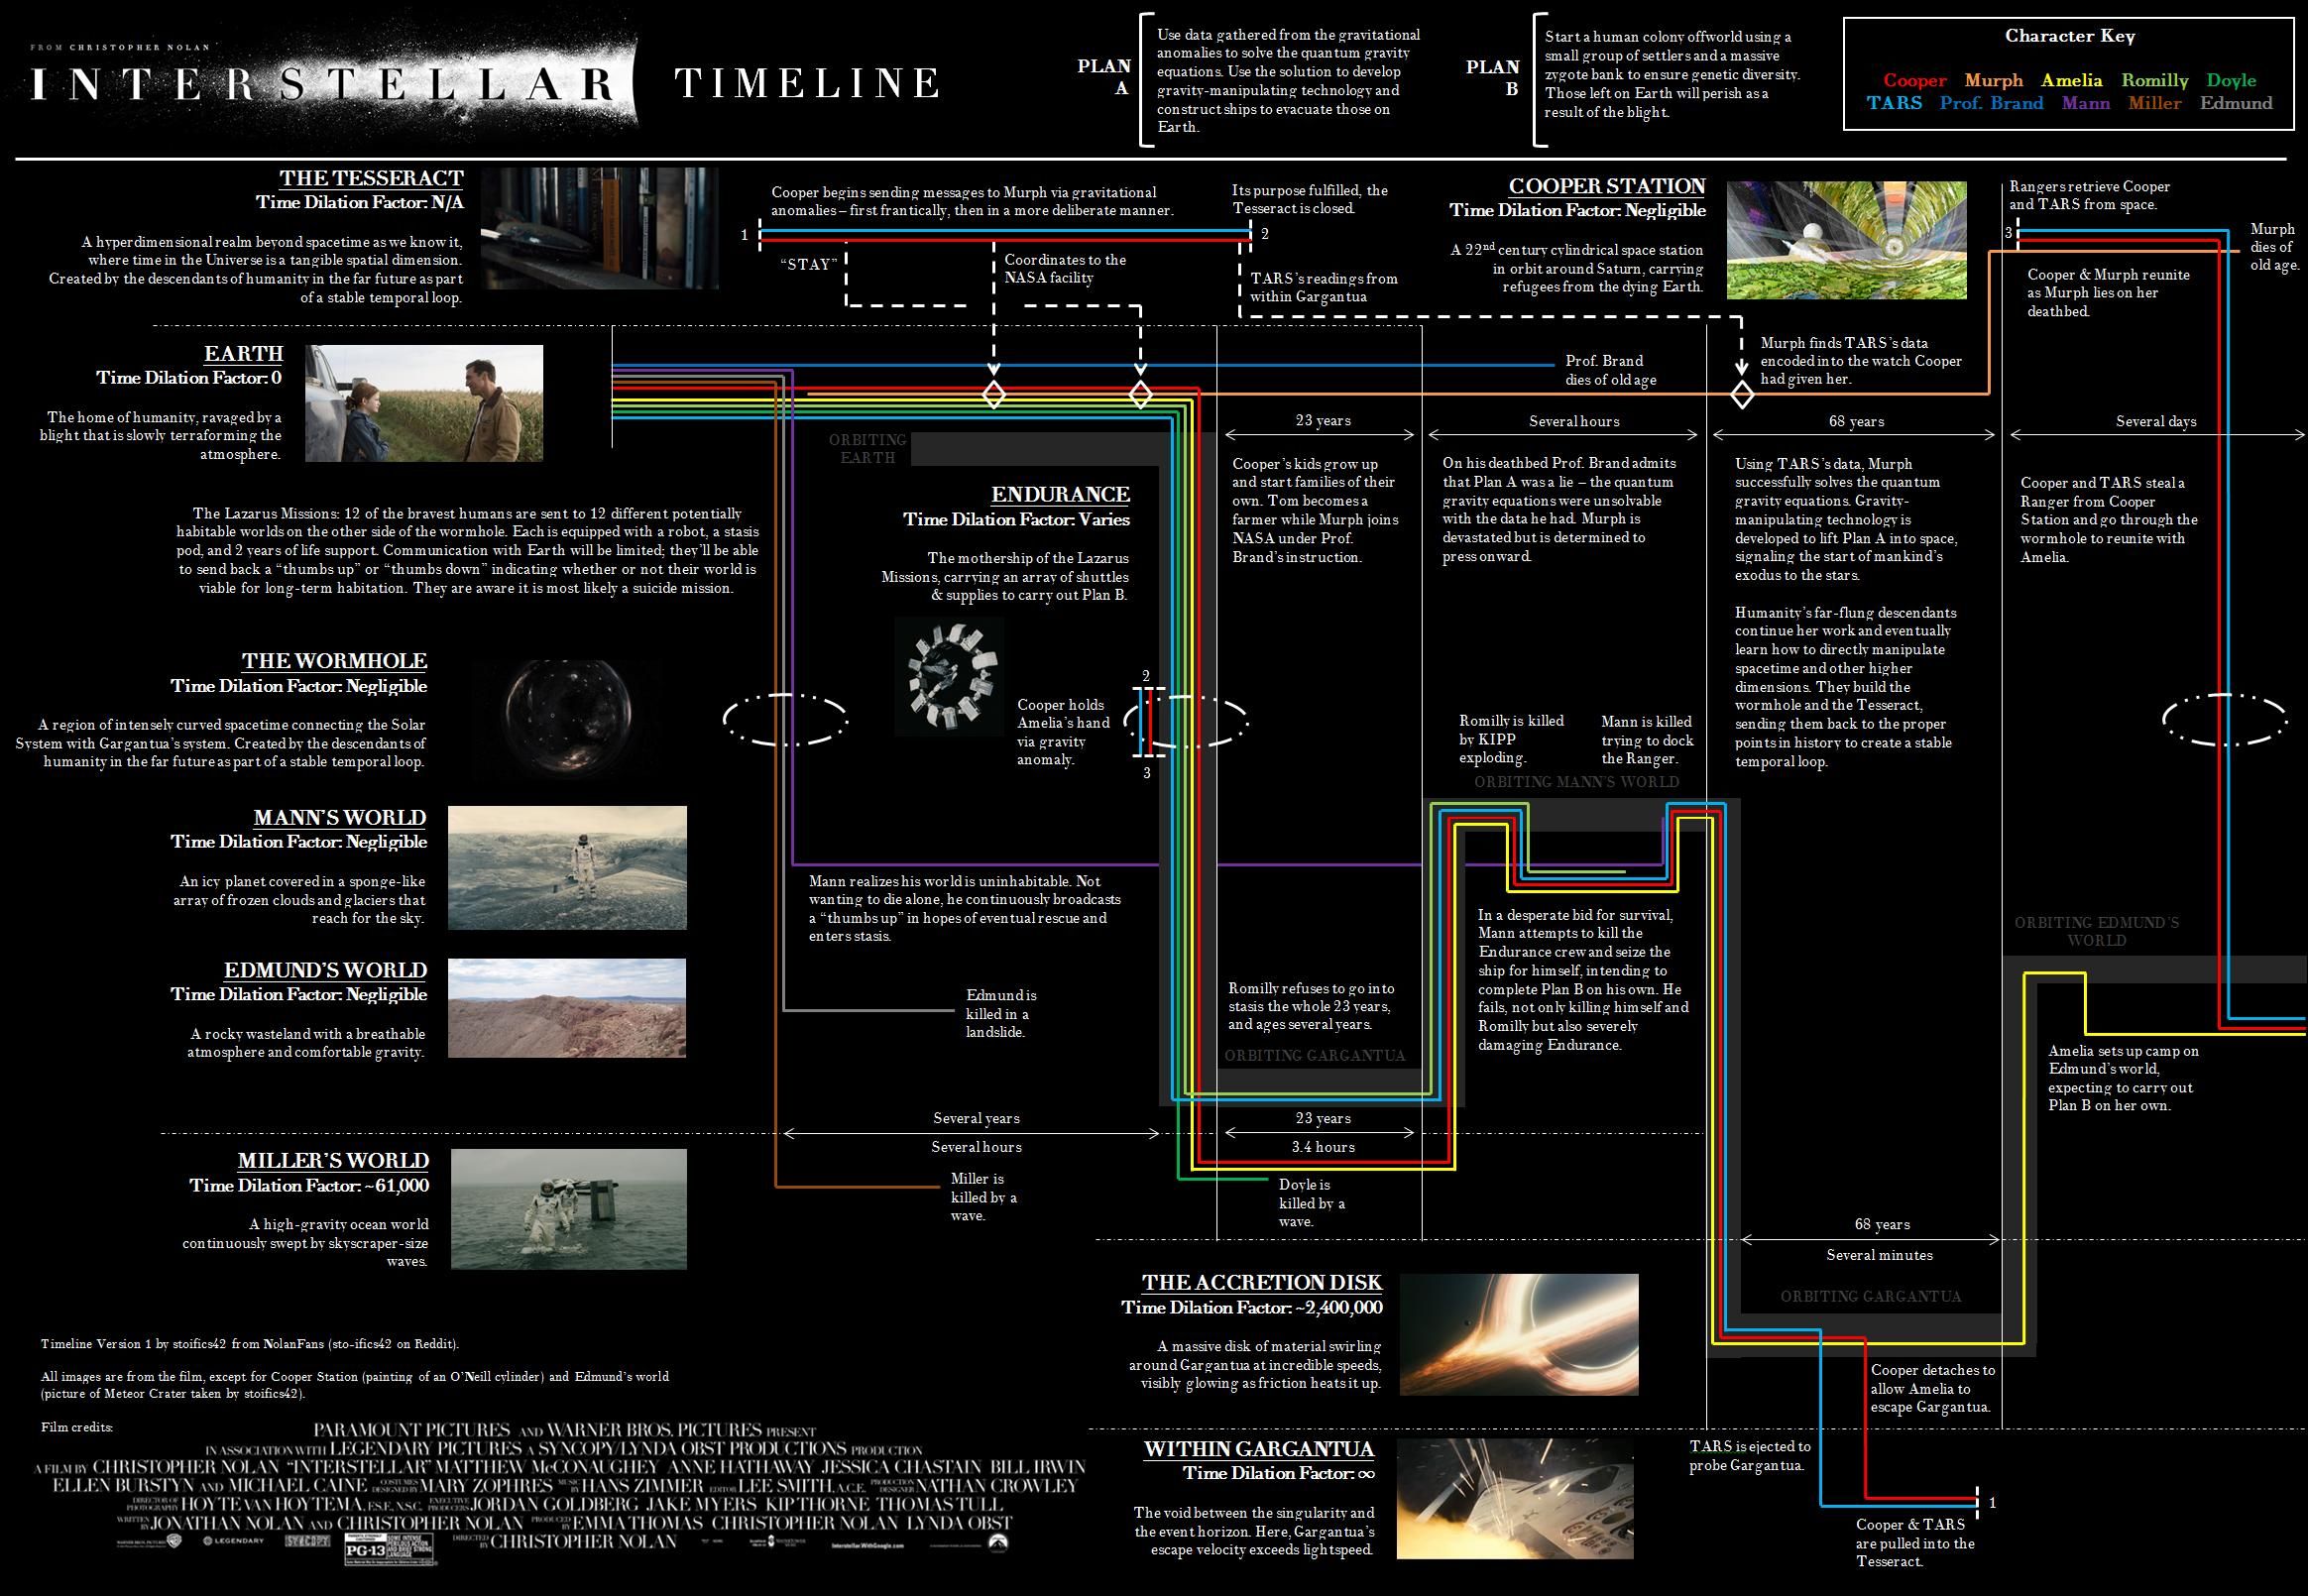 Interstellar Infographic May Explain The Movie&#039;s Timeline